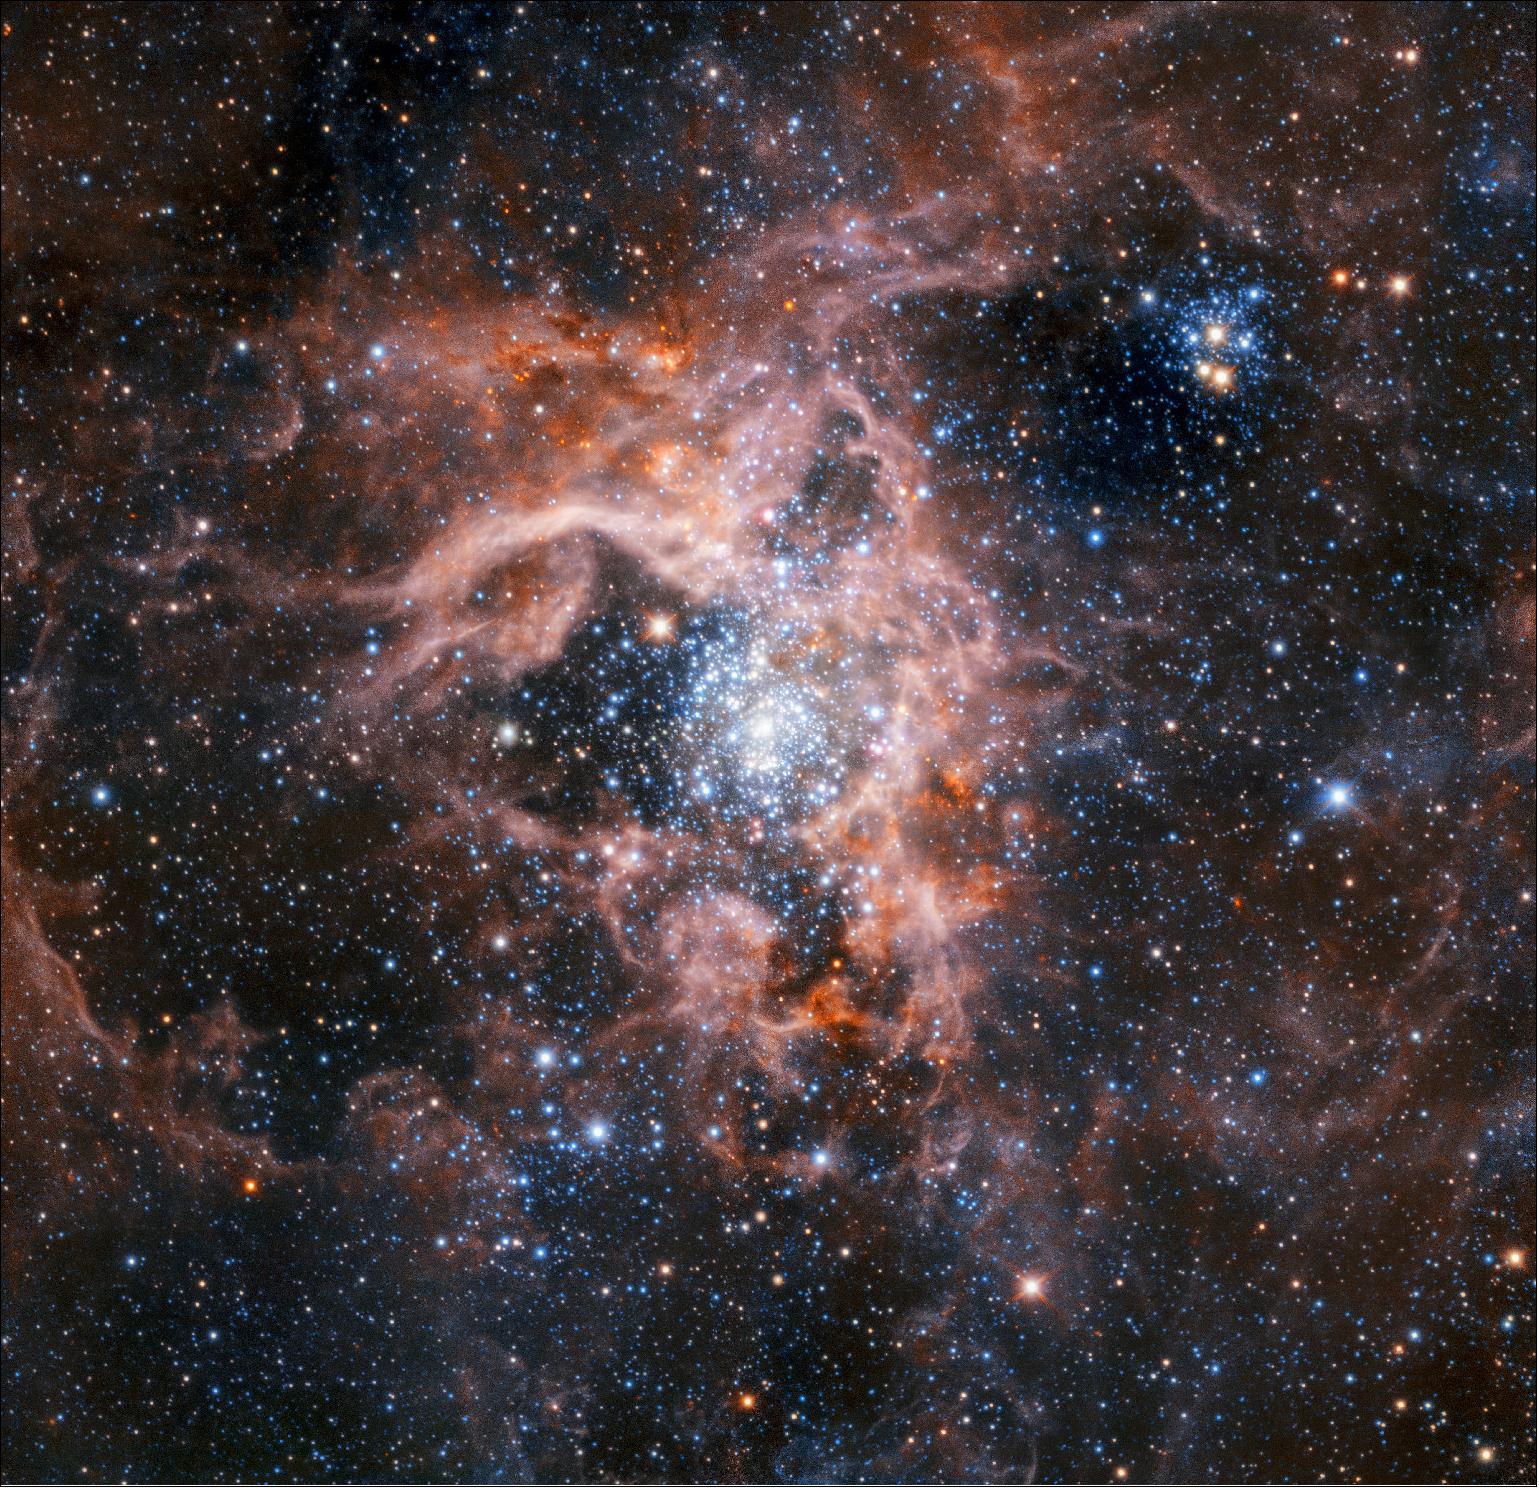 Figure 78: This image of the dramatic star formation region 30 Doradus, also known as the Tarantula Nebula, was created from a mosaic of images taken using the HAWK-I instrument working with the Adaptive optics Facility of ESO’s Very Large Telescope in Chile. The stars are significantly sharper than the same image without adaptive optics being used, and fainter stars can be seen (image credit: ESO) 118)